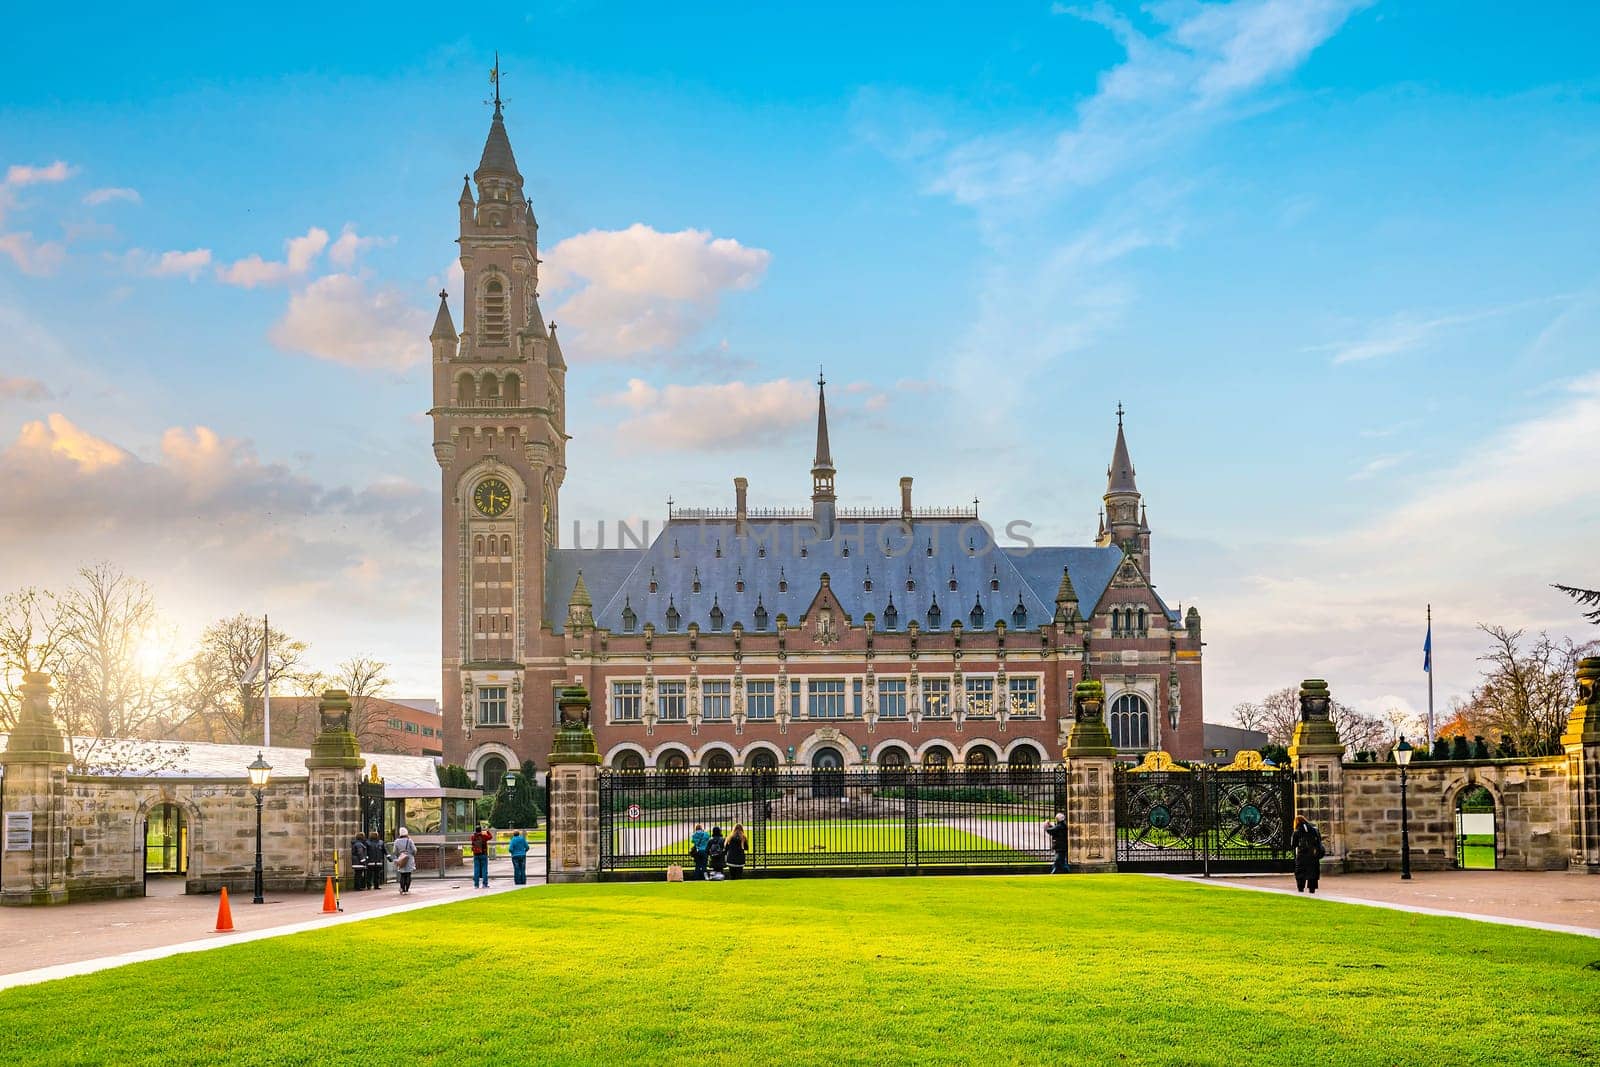 The International Court of Justice in the Peace Palace in Hague, Netherlands